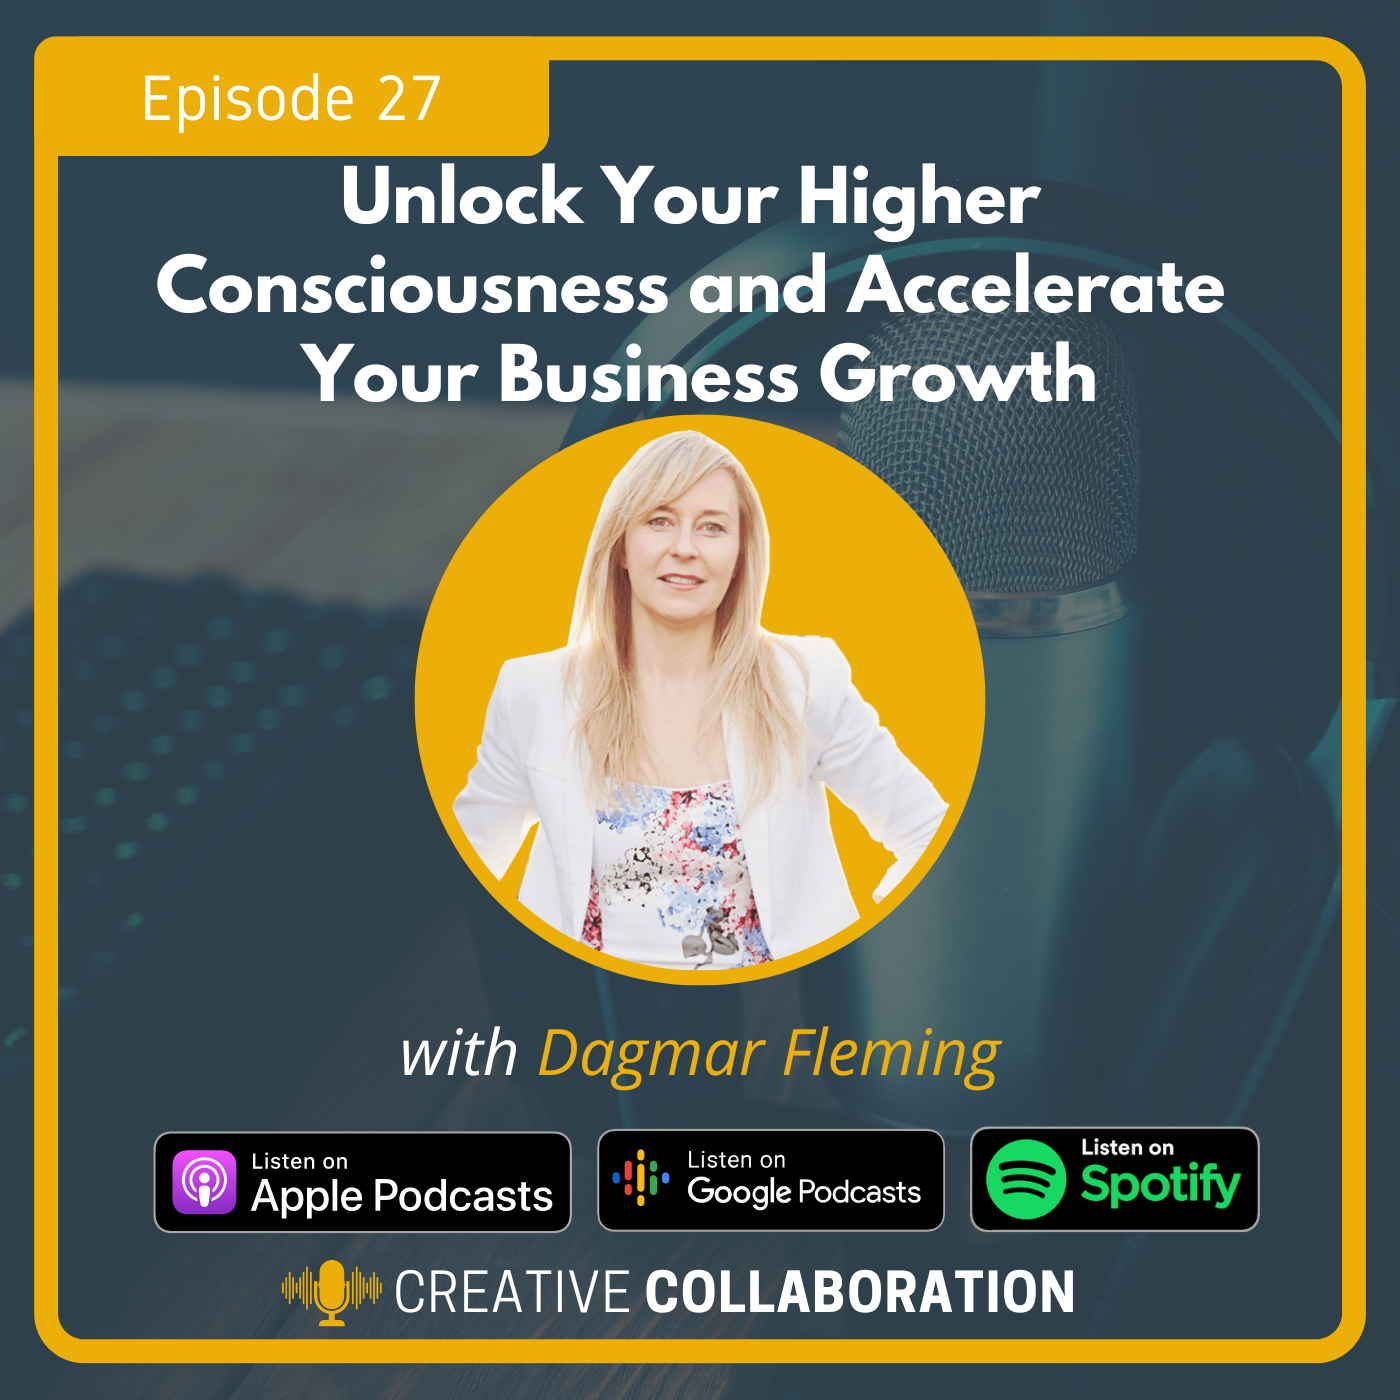 Unlock Your Higher Consciousness and Accelerate Your Business Growth with Dagmar Fleming